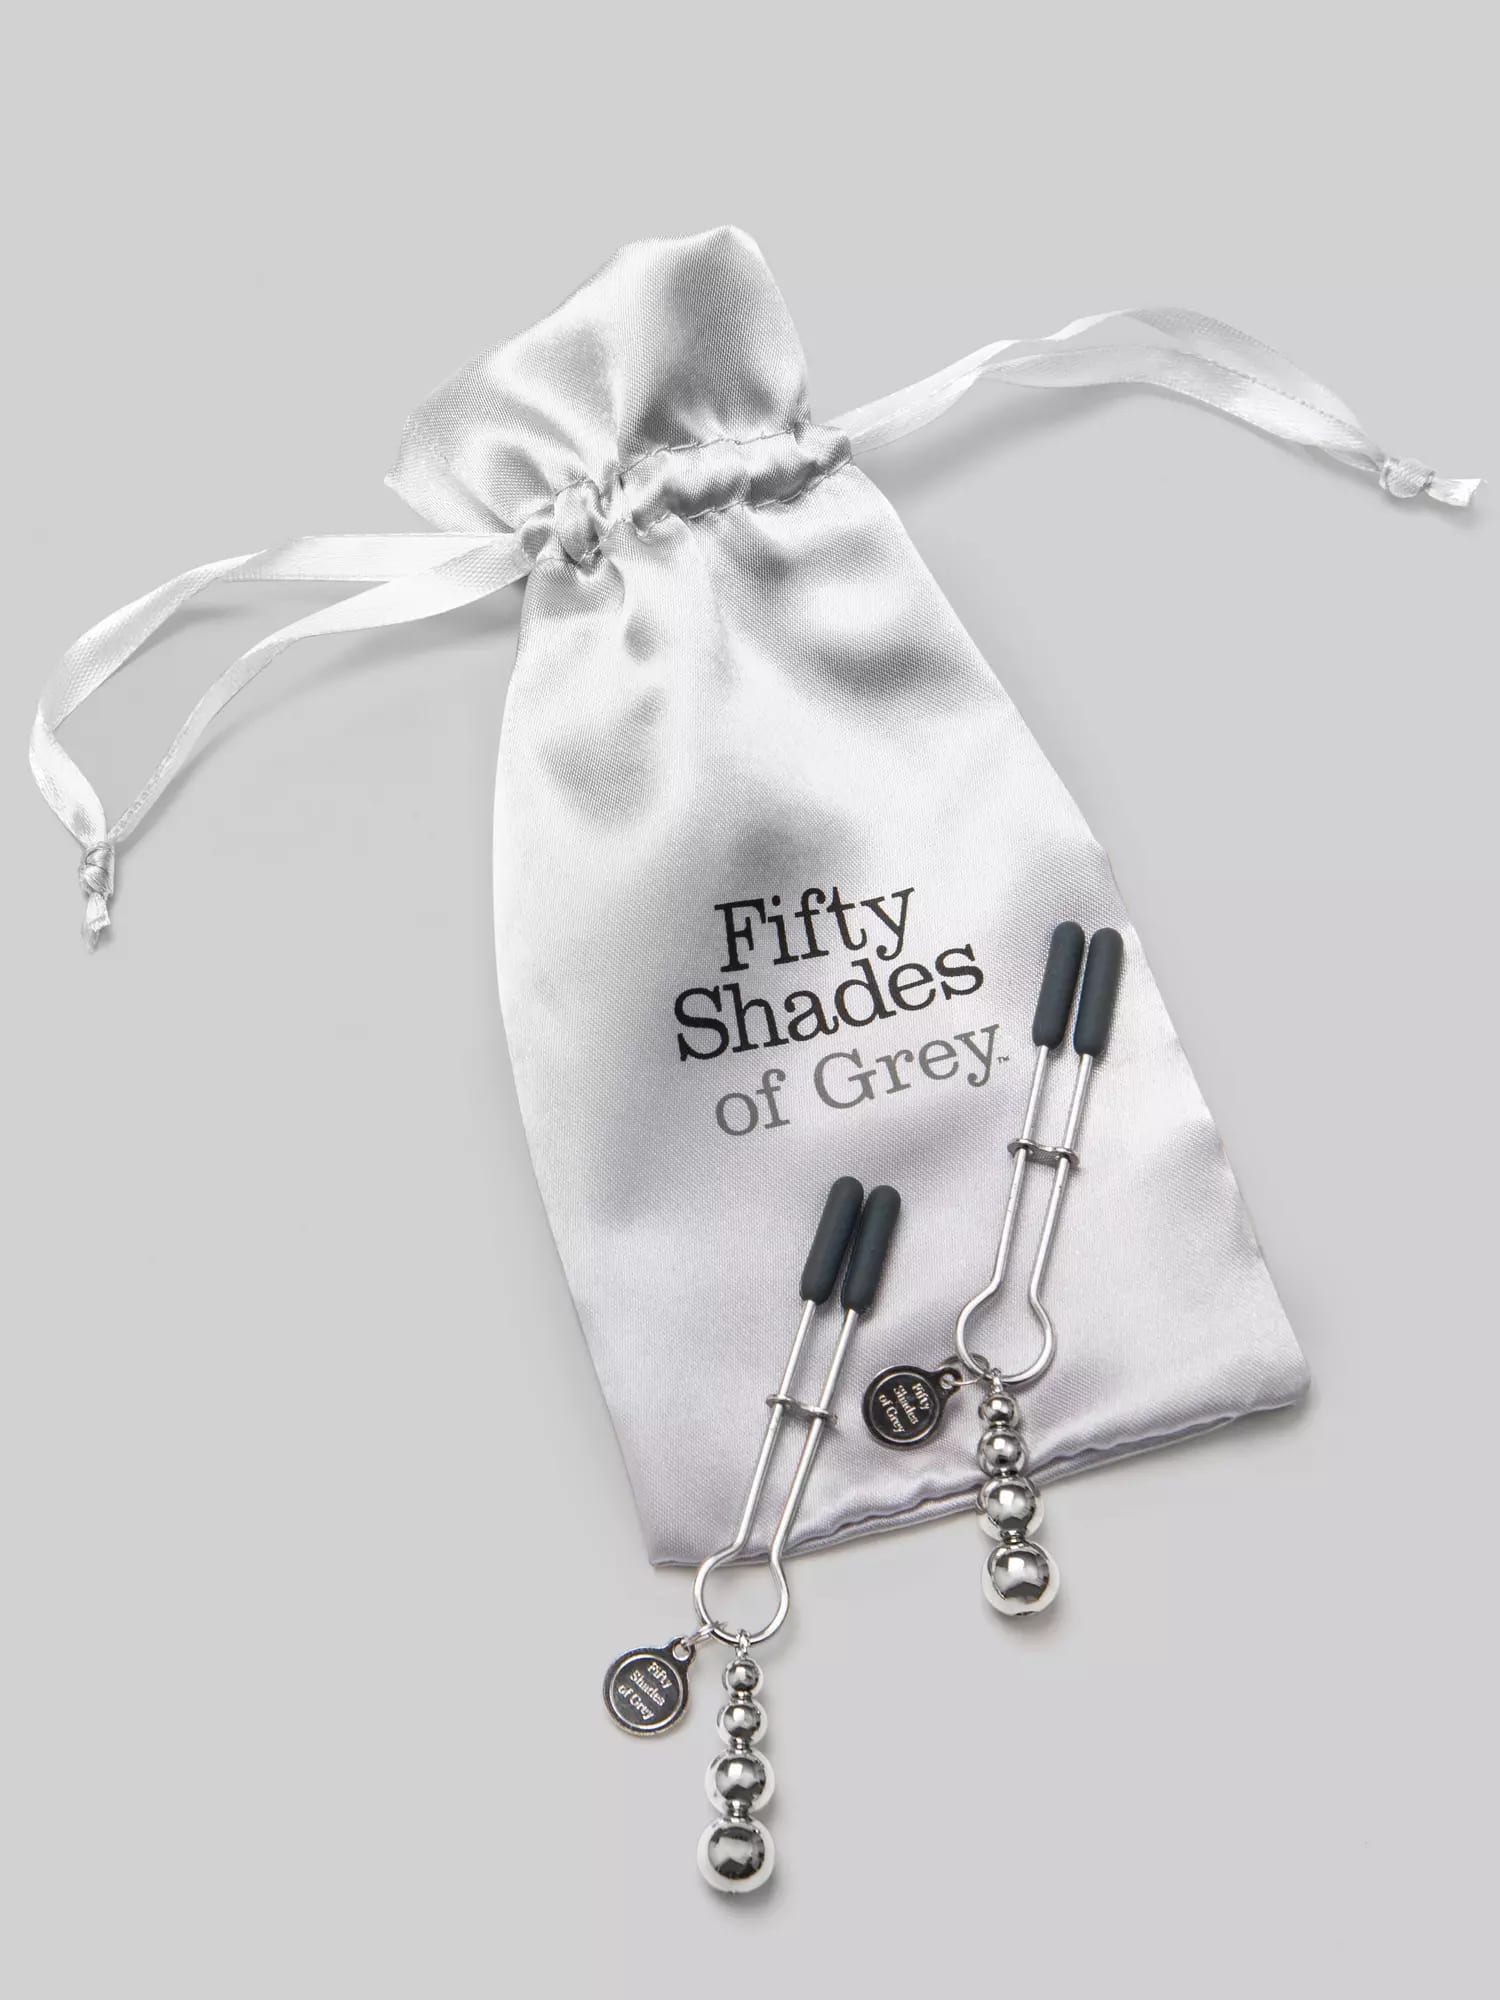 Fifty Shades of Grey Adjustable Nipple Clamps. Slide 23